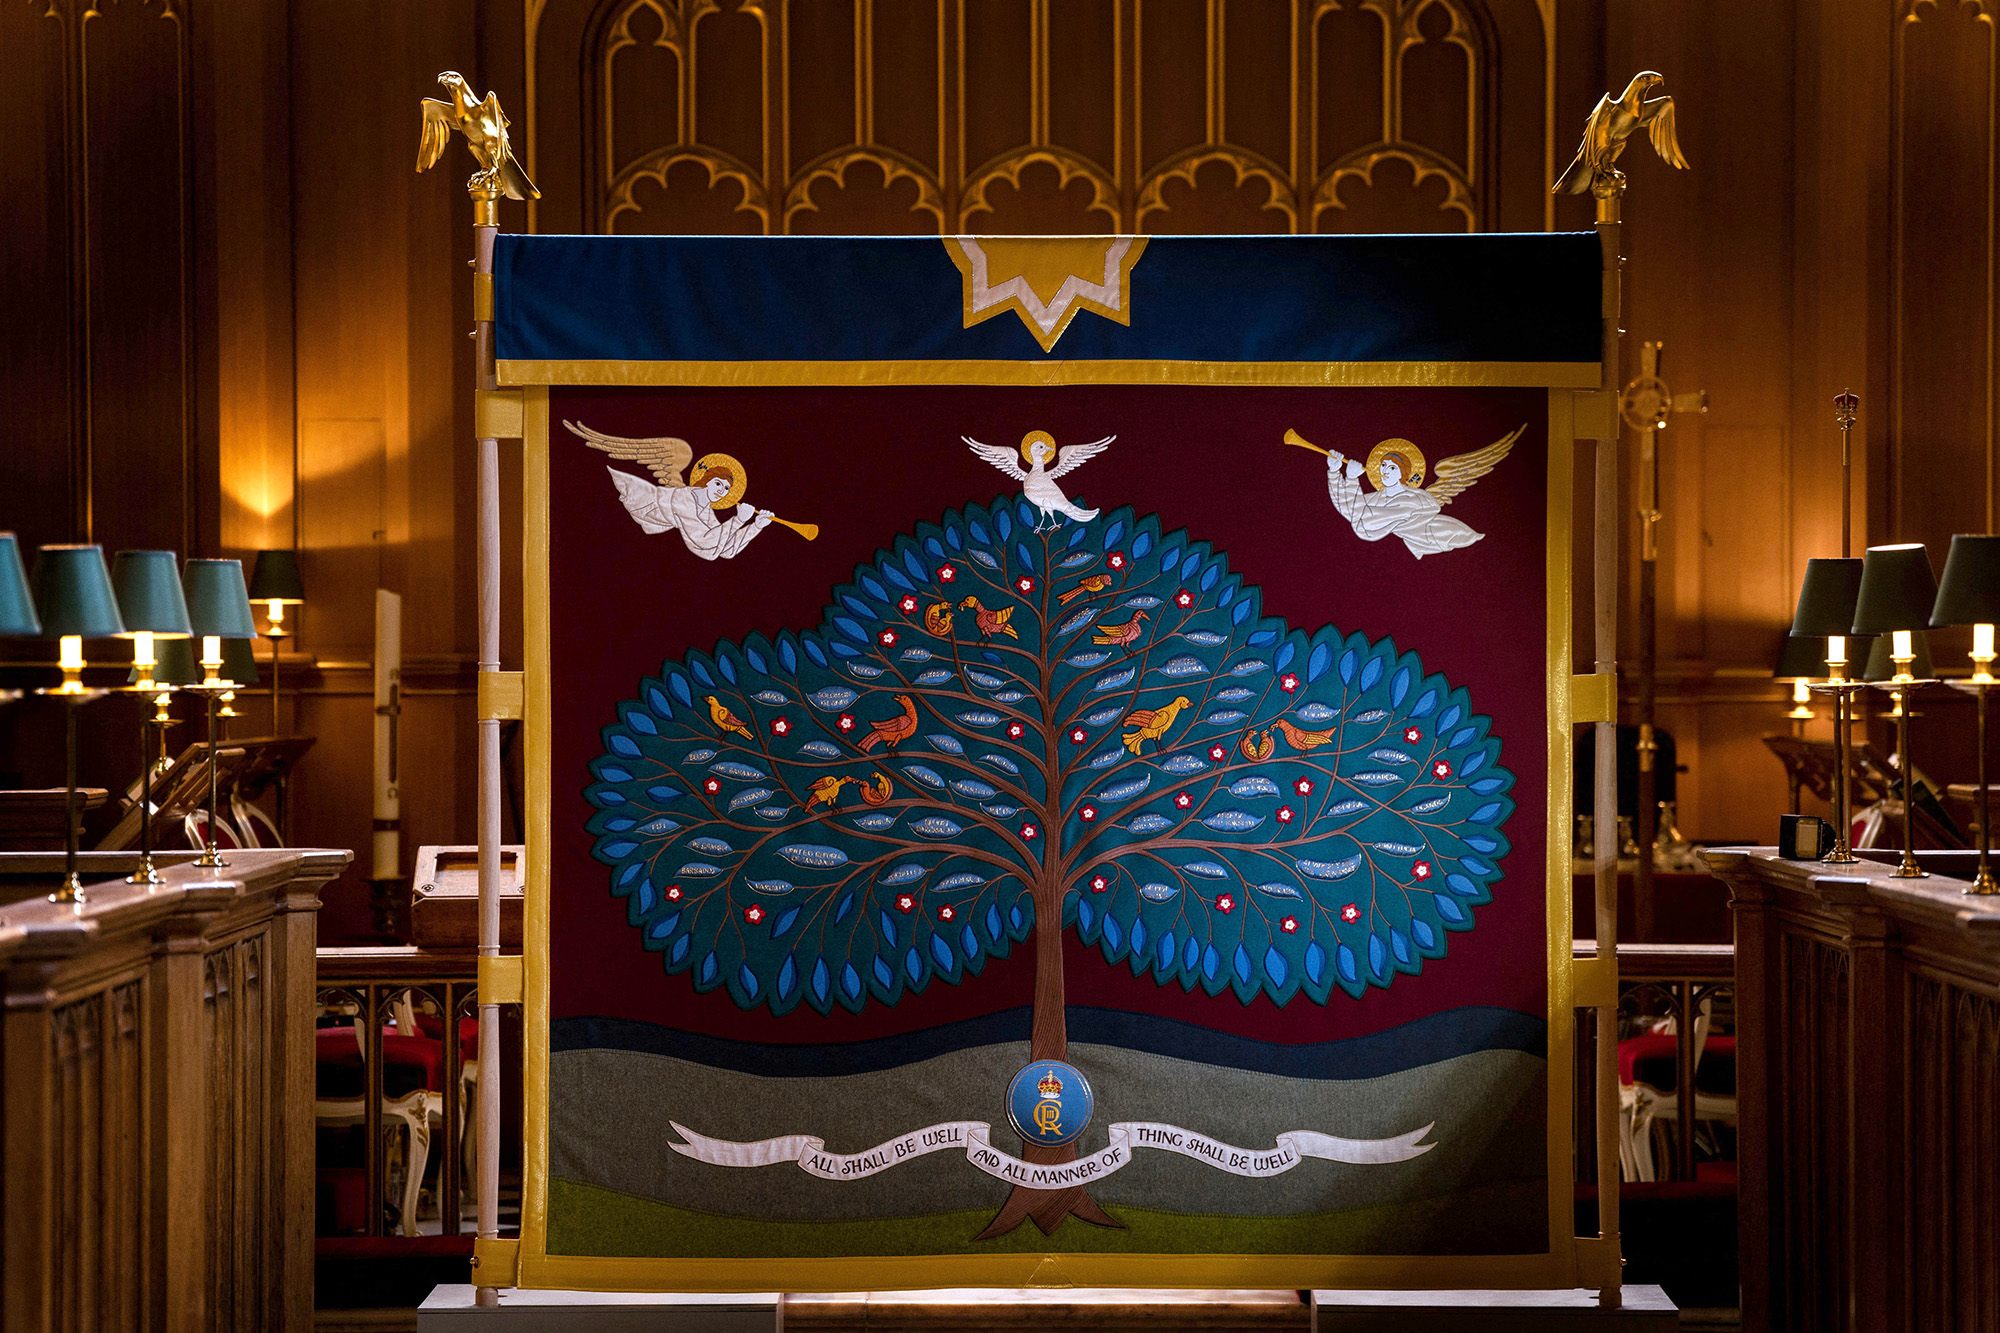 The anointing screen, which will be used in the coronation of King Charles III and has been handmade by the Royal School of Needlework, is seen in the Chapel Royal at St James's Palace in London on April 24.